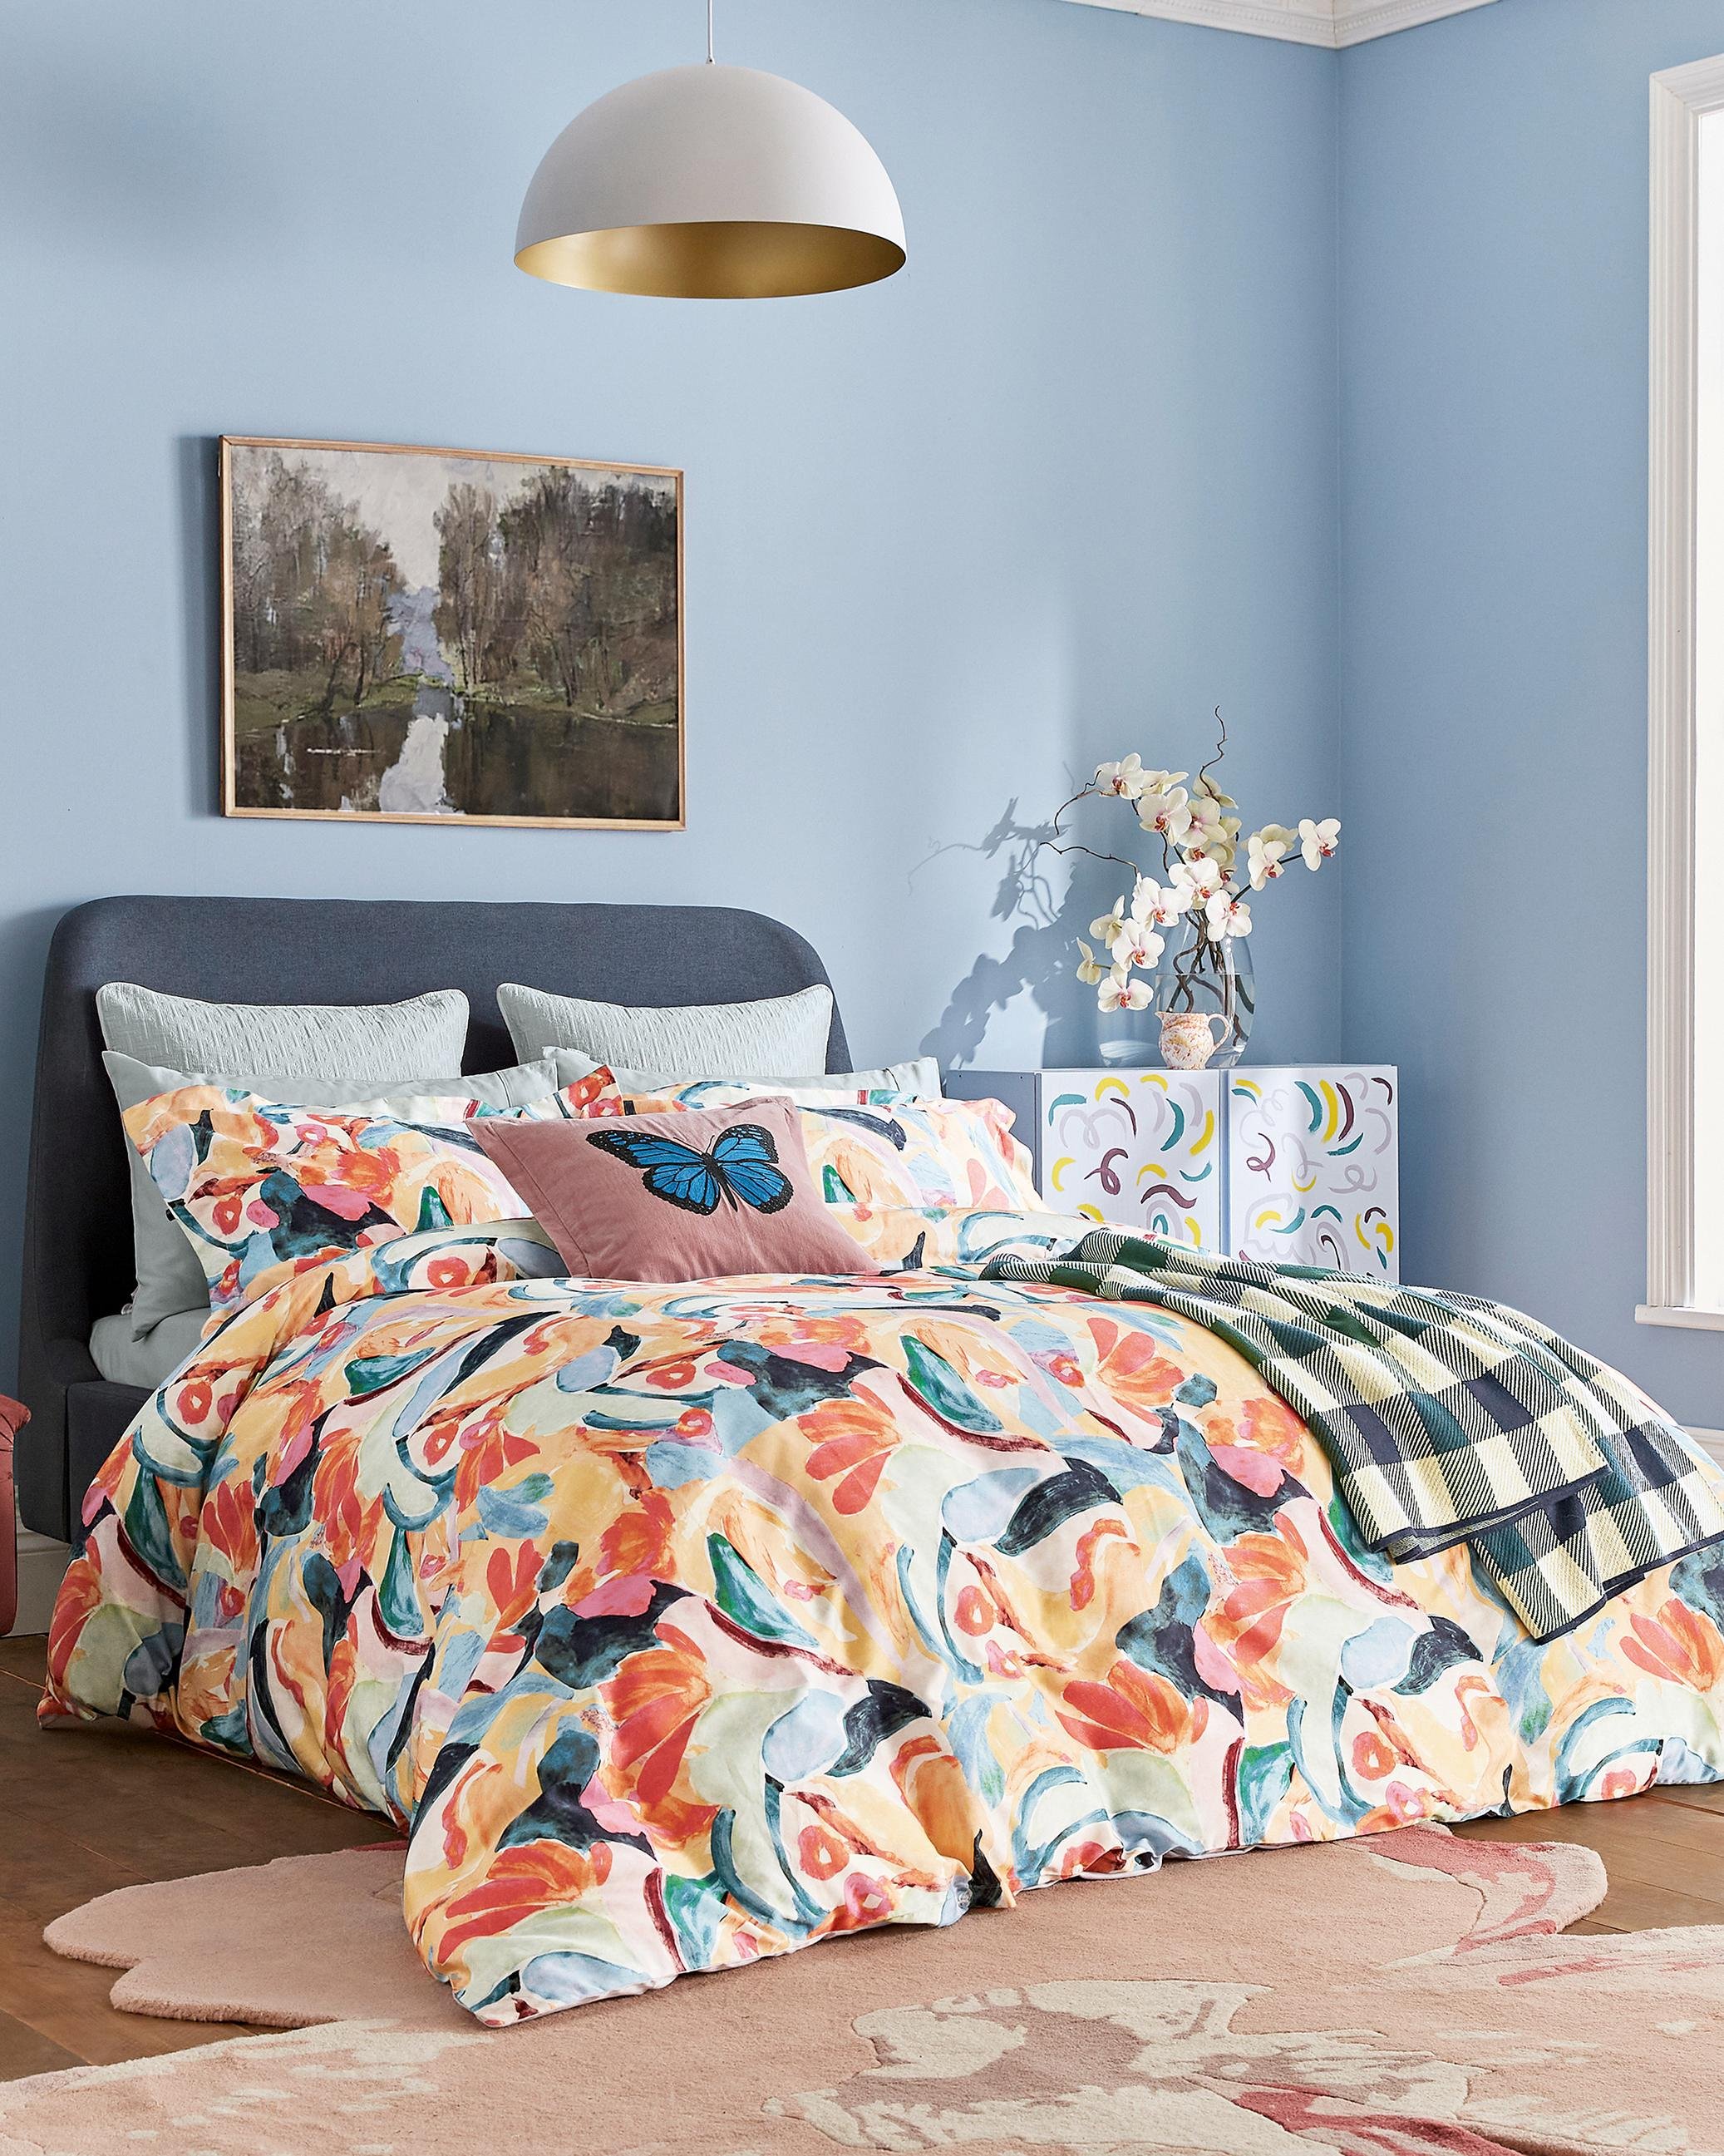 DUCABSM3MUL Abstract King Size Duvet Cover - ARTFLO - Multicoloured by TED BAKER